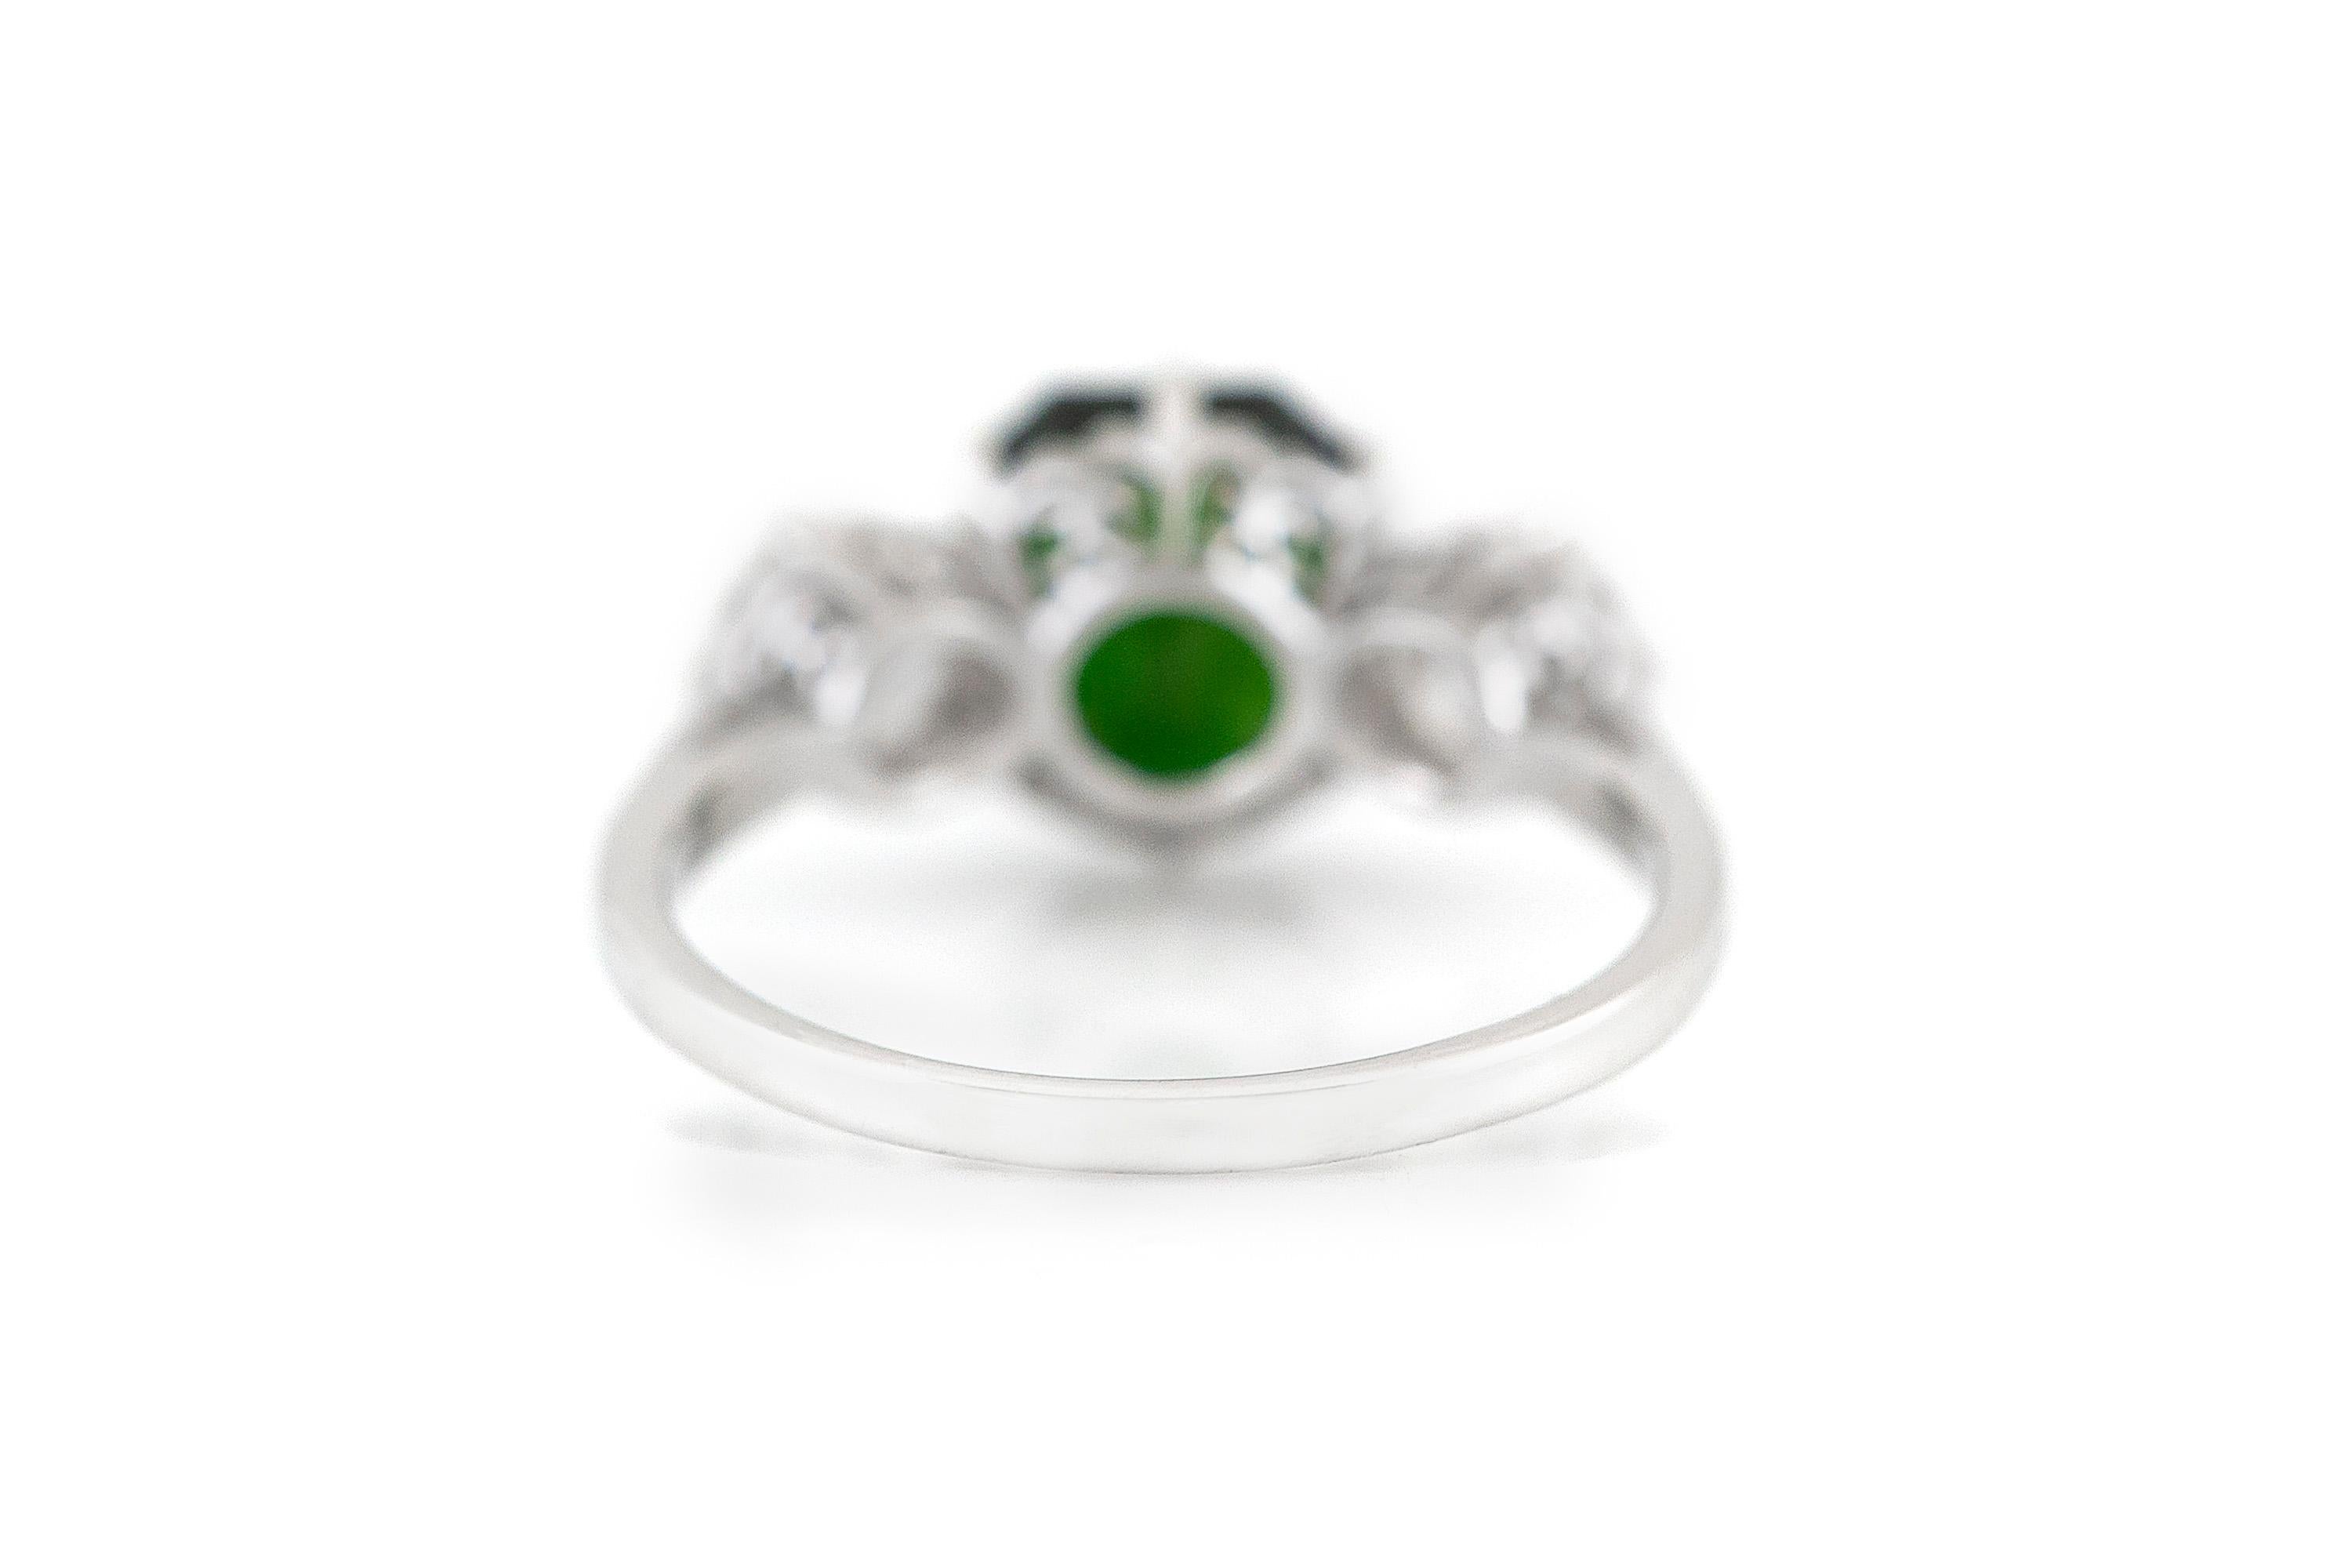 The ring is finely crafted in 18k white gold with green tourmaline weighing approximately total of 1.94 carat and diamonds weighing approximately total of 0.82 carat.